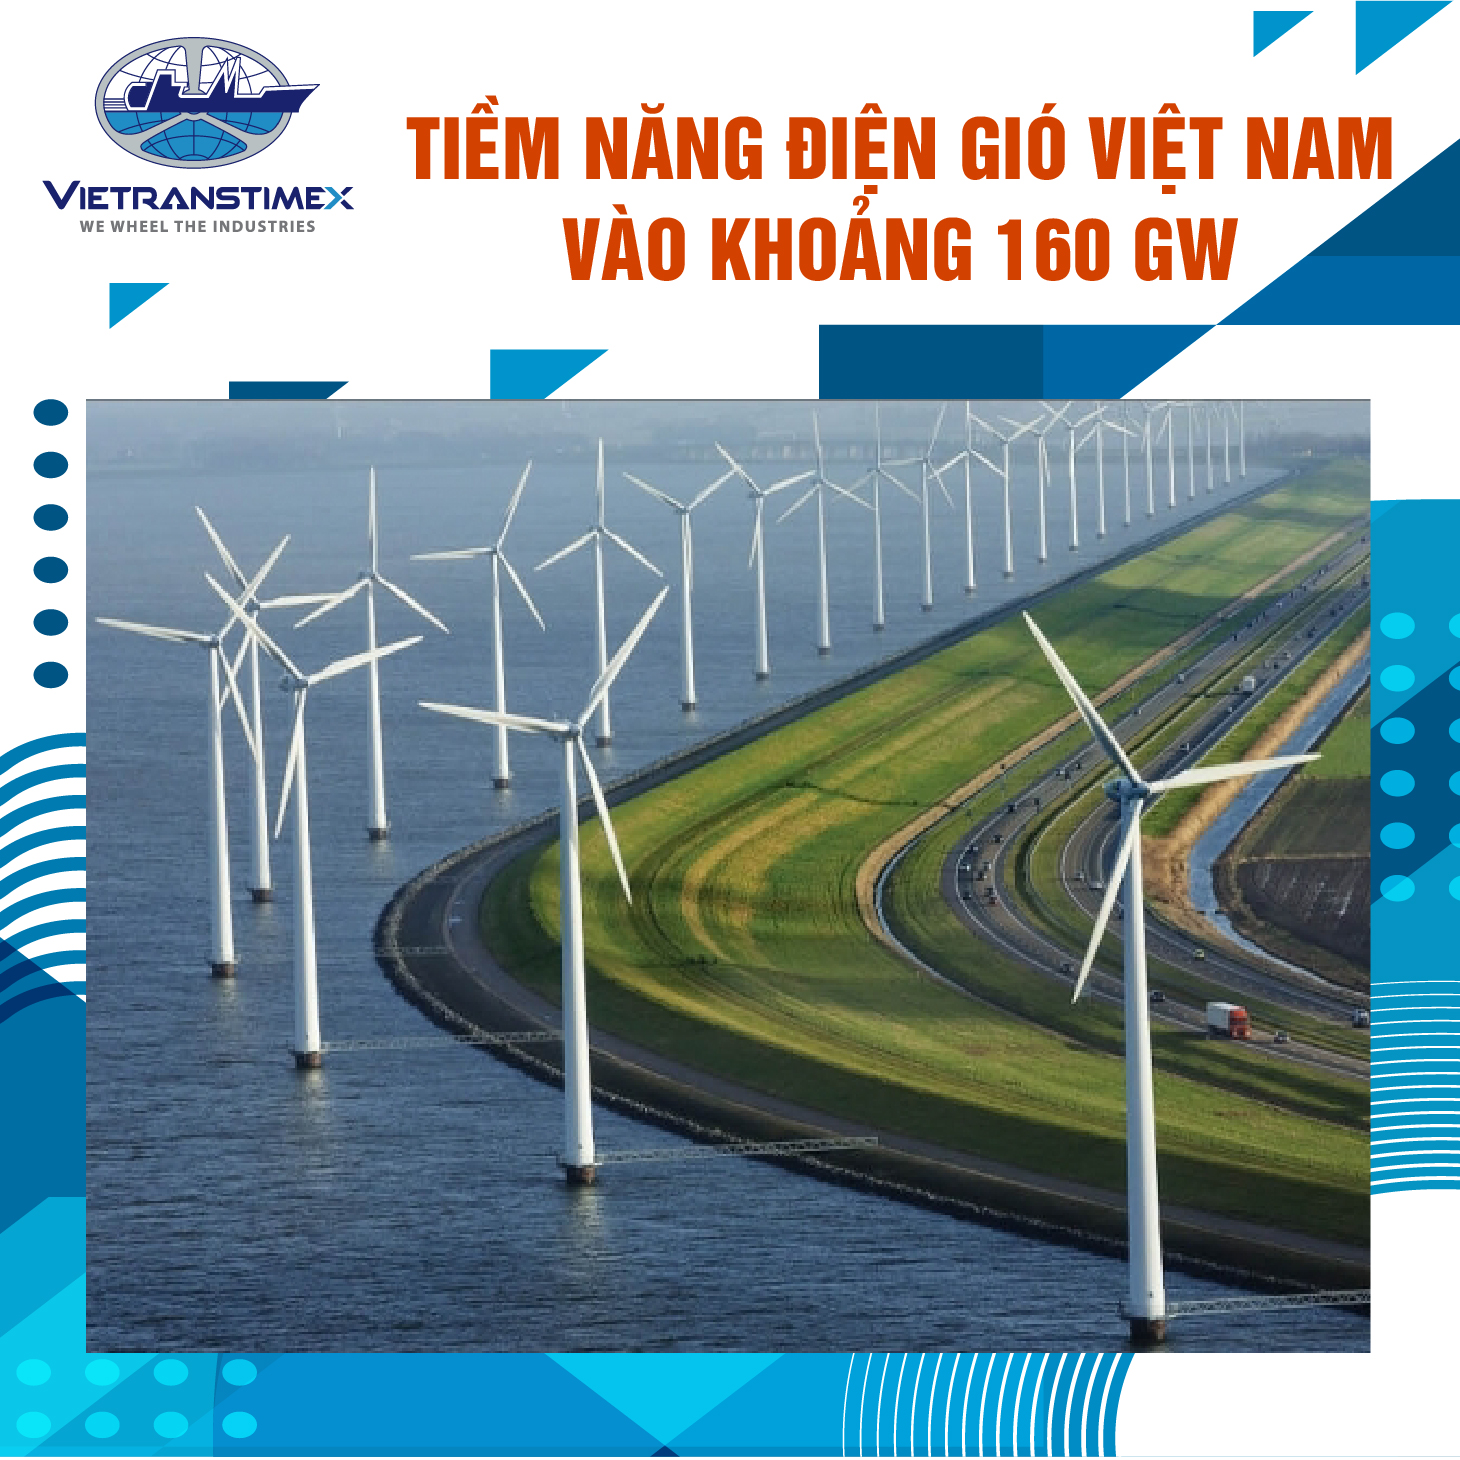 Vietnam Has Great Potential For Wind Power